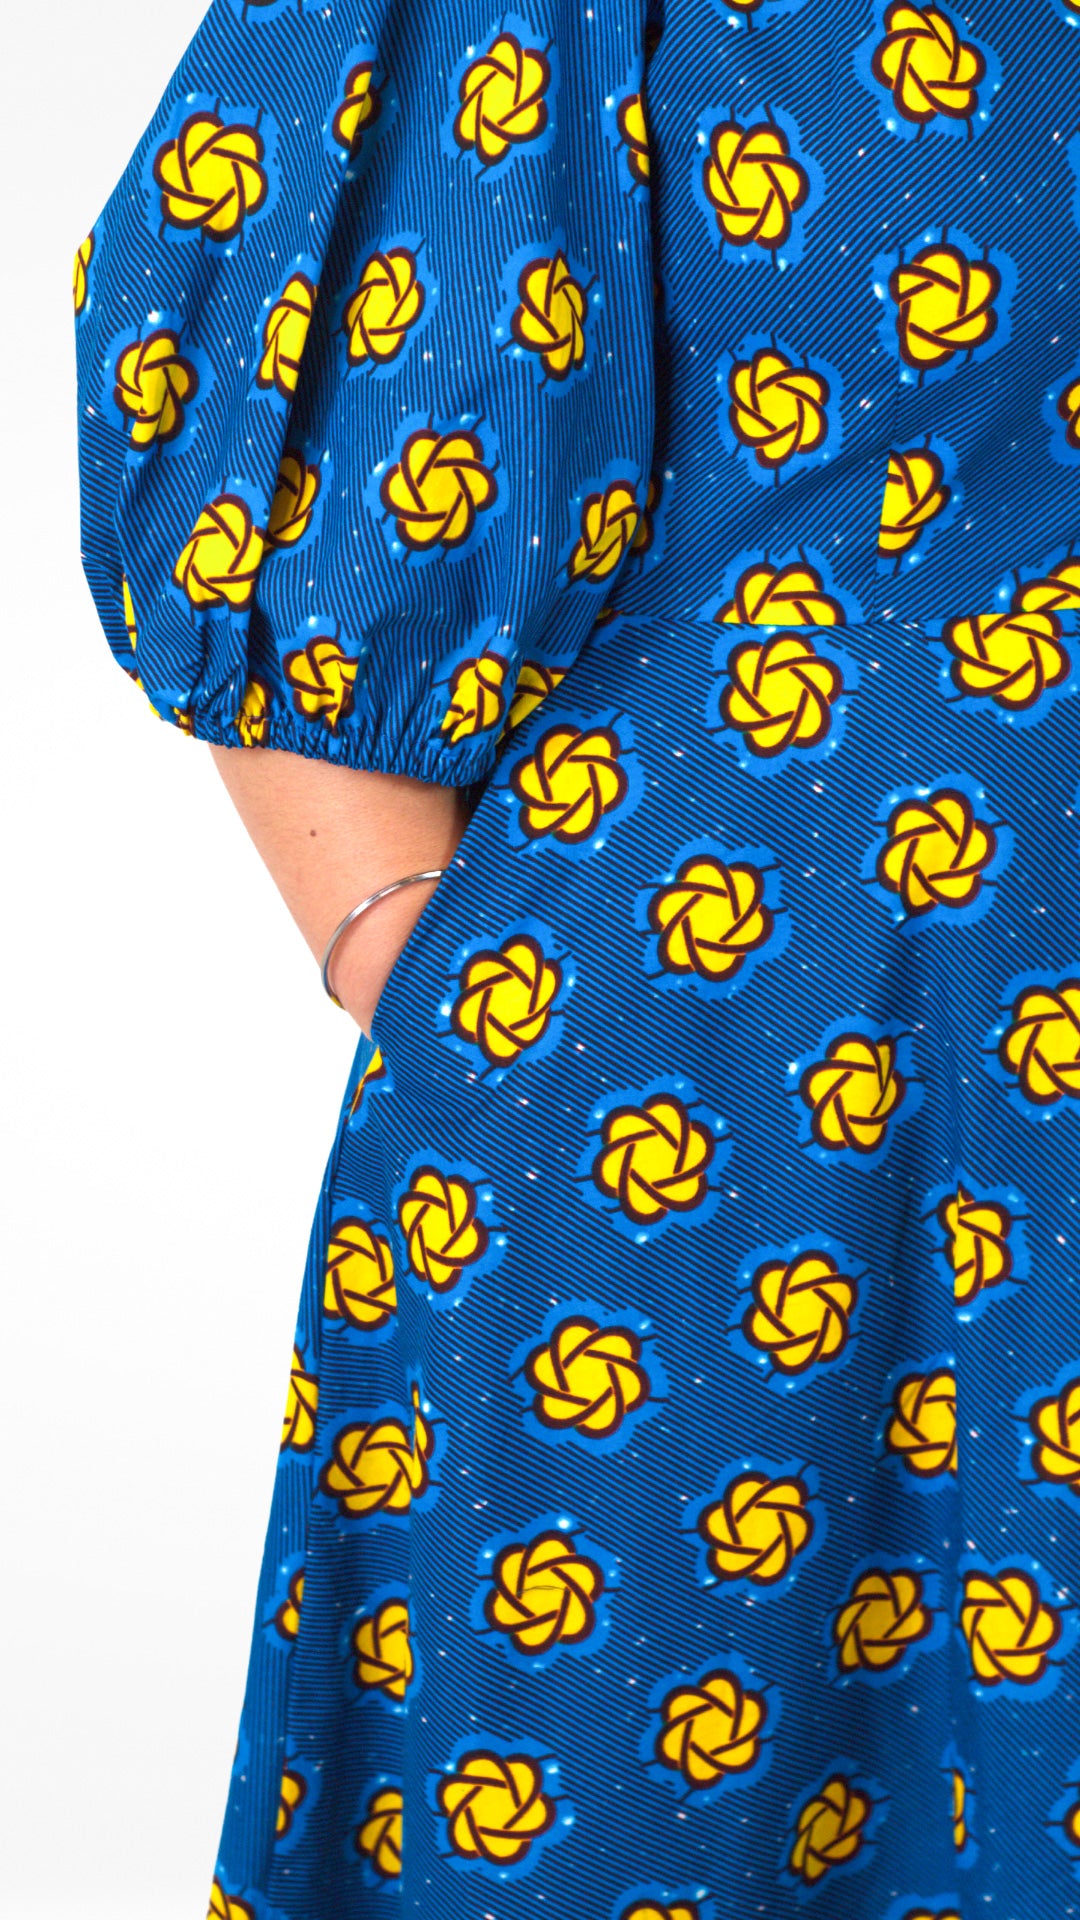 Close-up details of the fitted waistline and puff sleeves of the blue dress, accentuating its tailored design and the yellow elements.